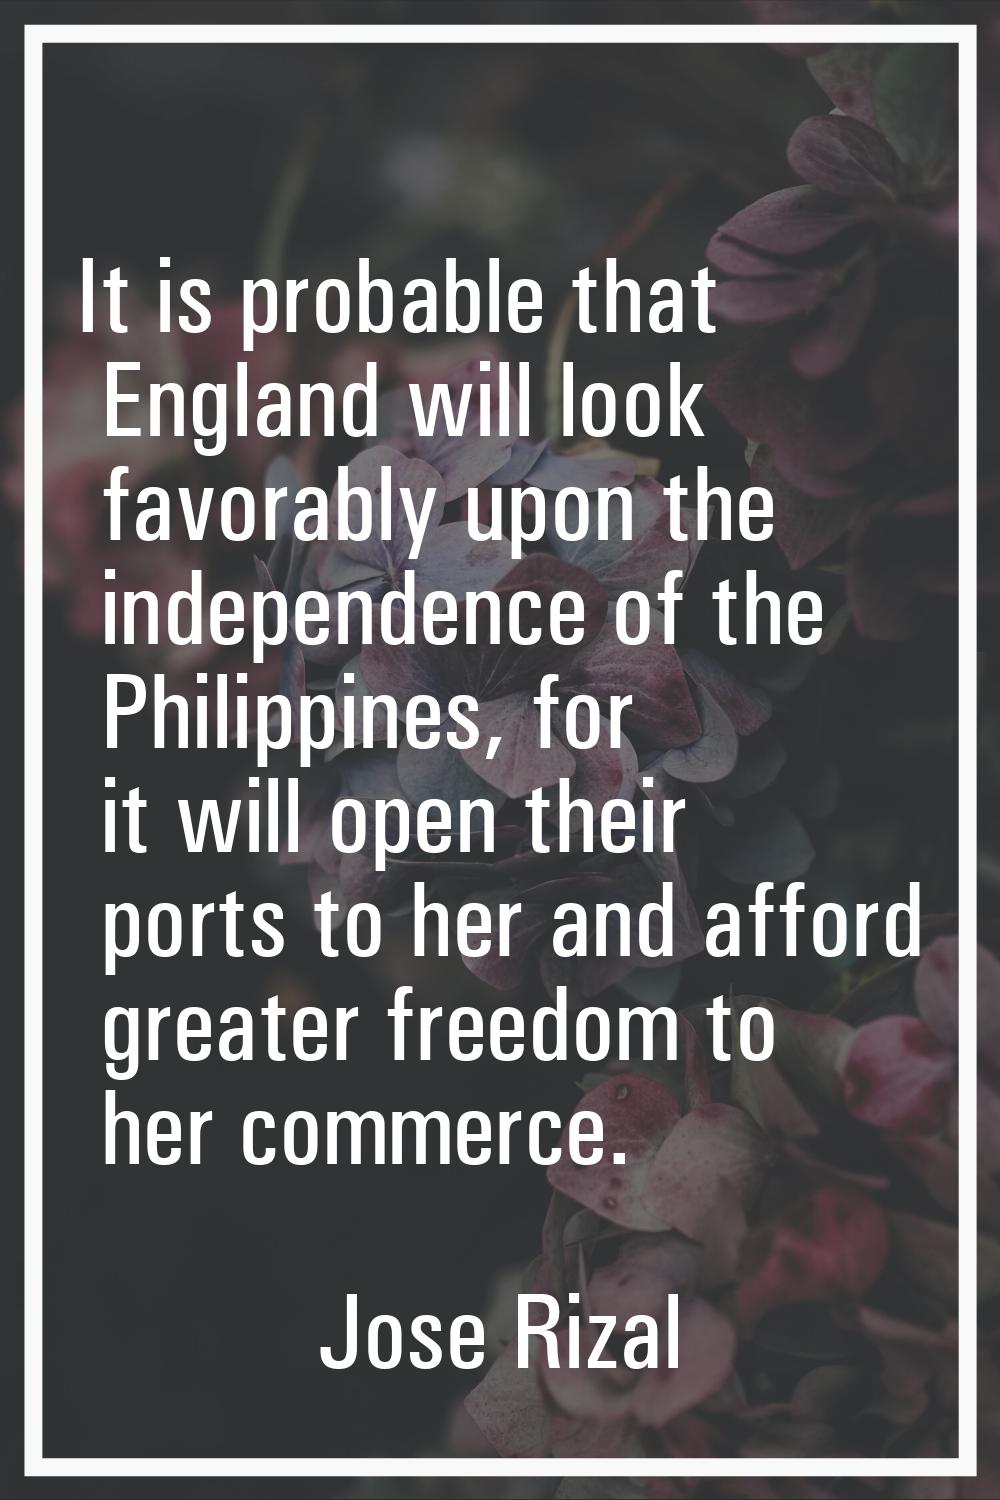 It is probable that England will look favorably upon the independence of the Philippines, for it wi